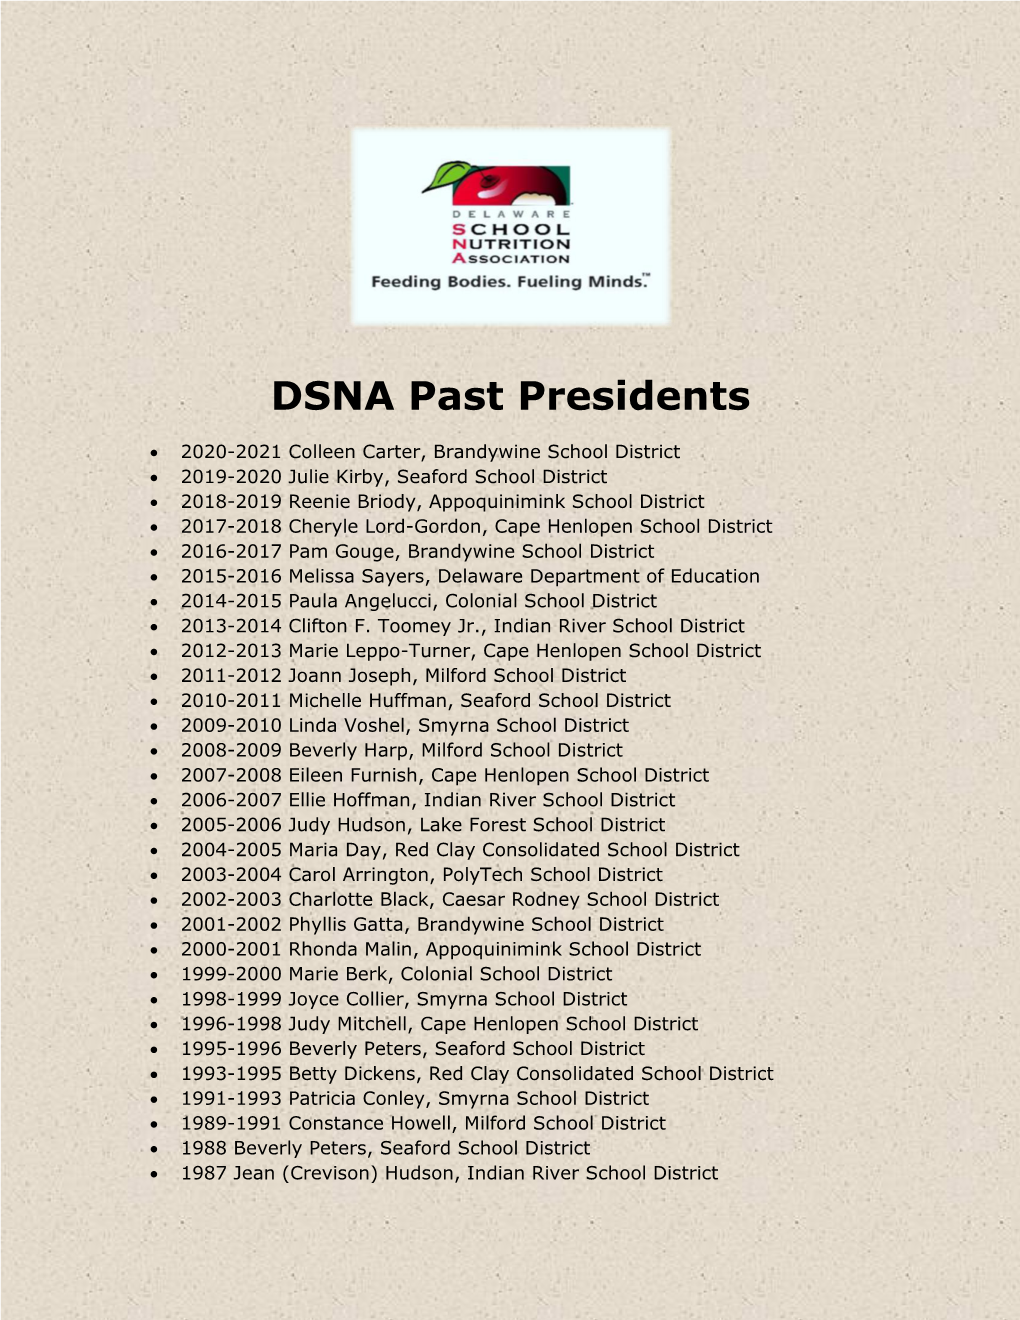 DSNA Past Presidents